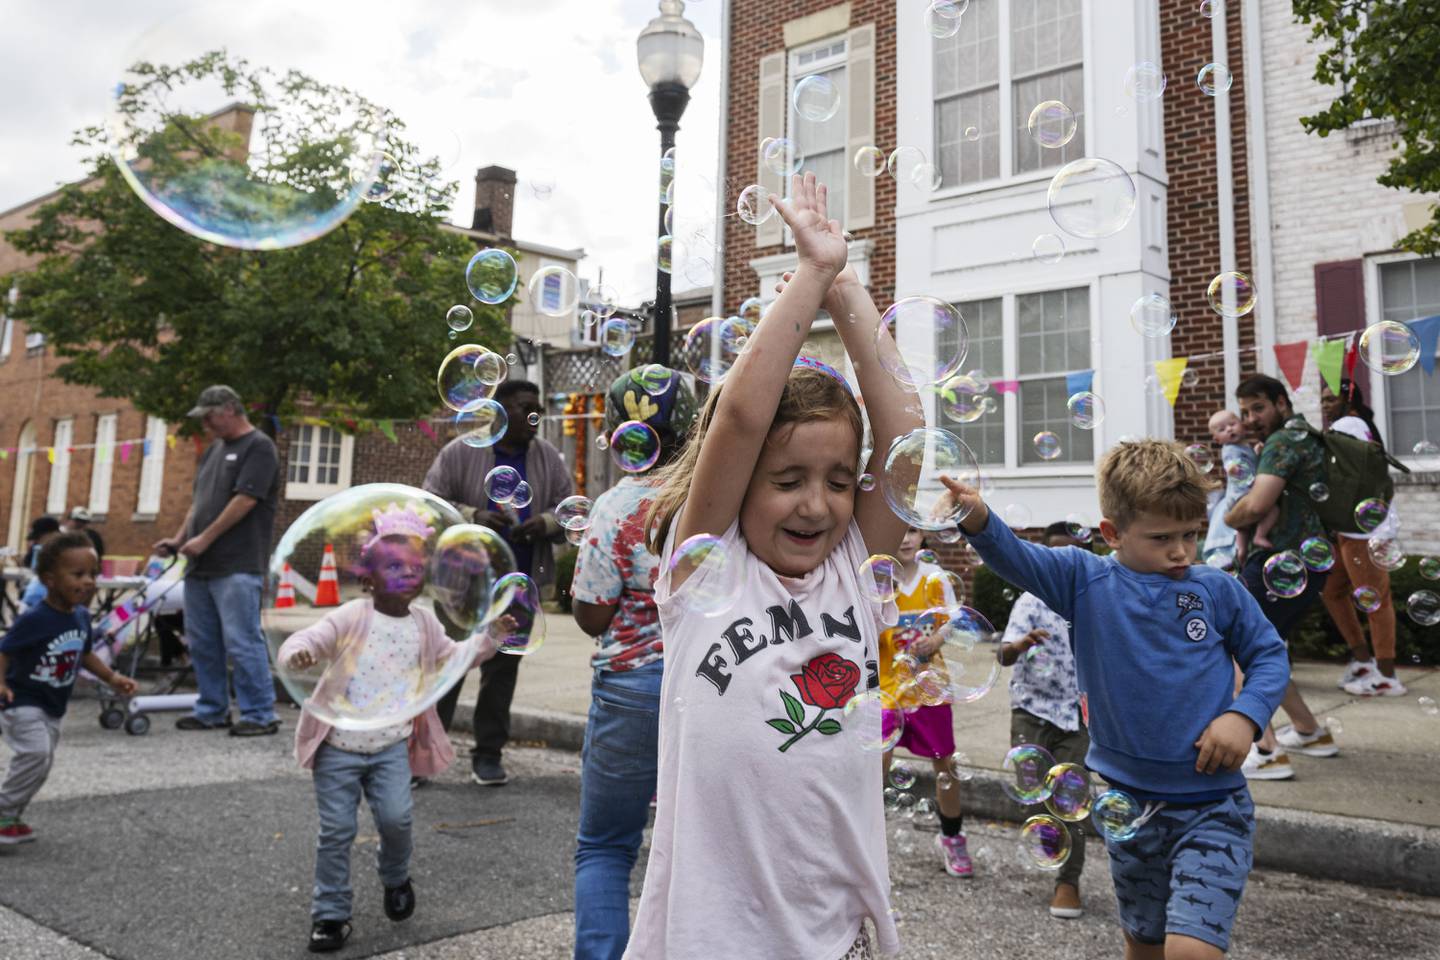 Luna Coates, 5, runs through bubbles made by Bubbleverse’s Lindsey Noel during the Pigtown Festival in Baltimore, MD on September 30, 2023. (